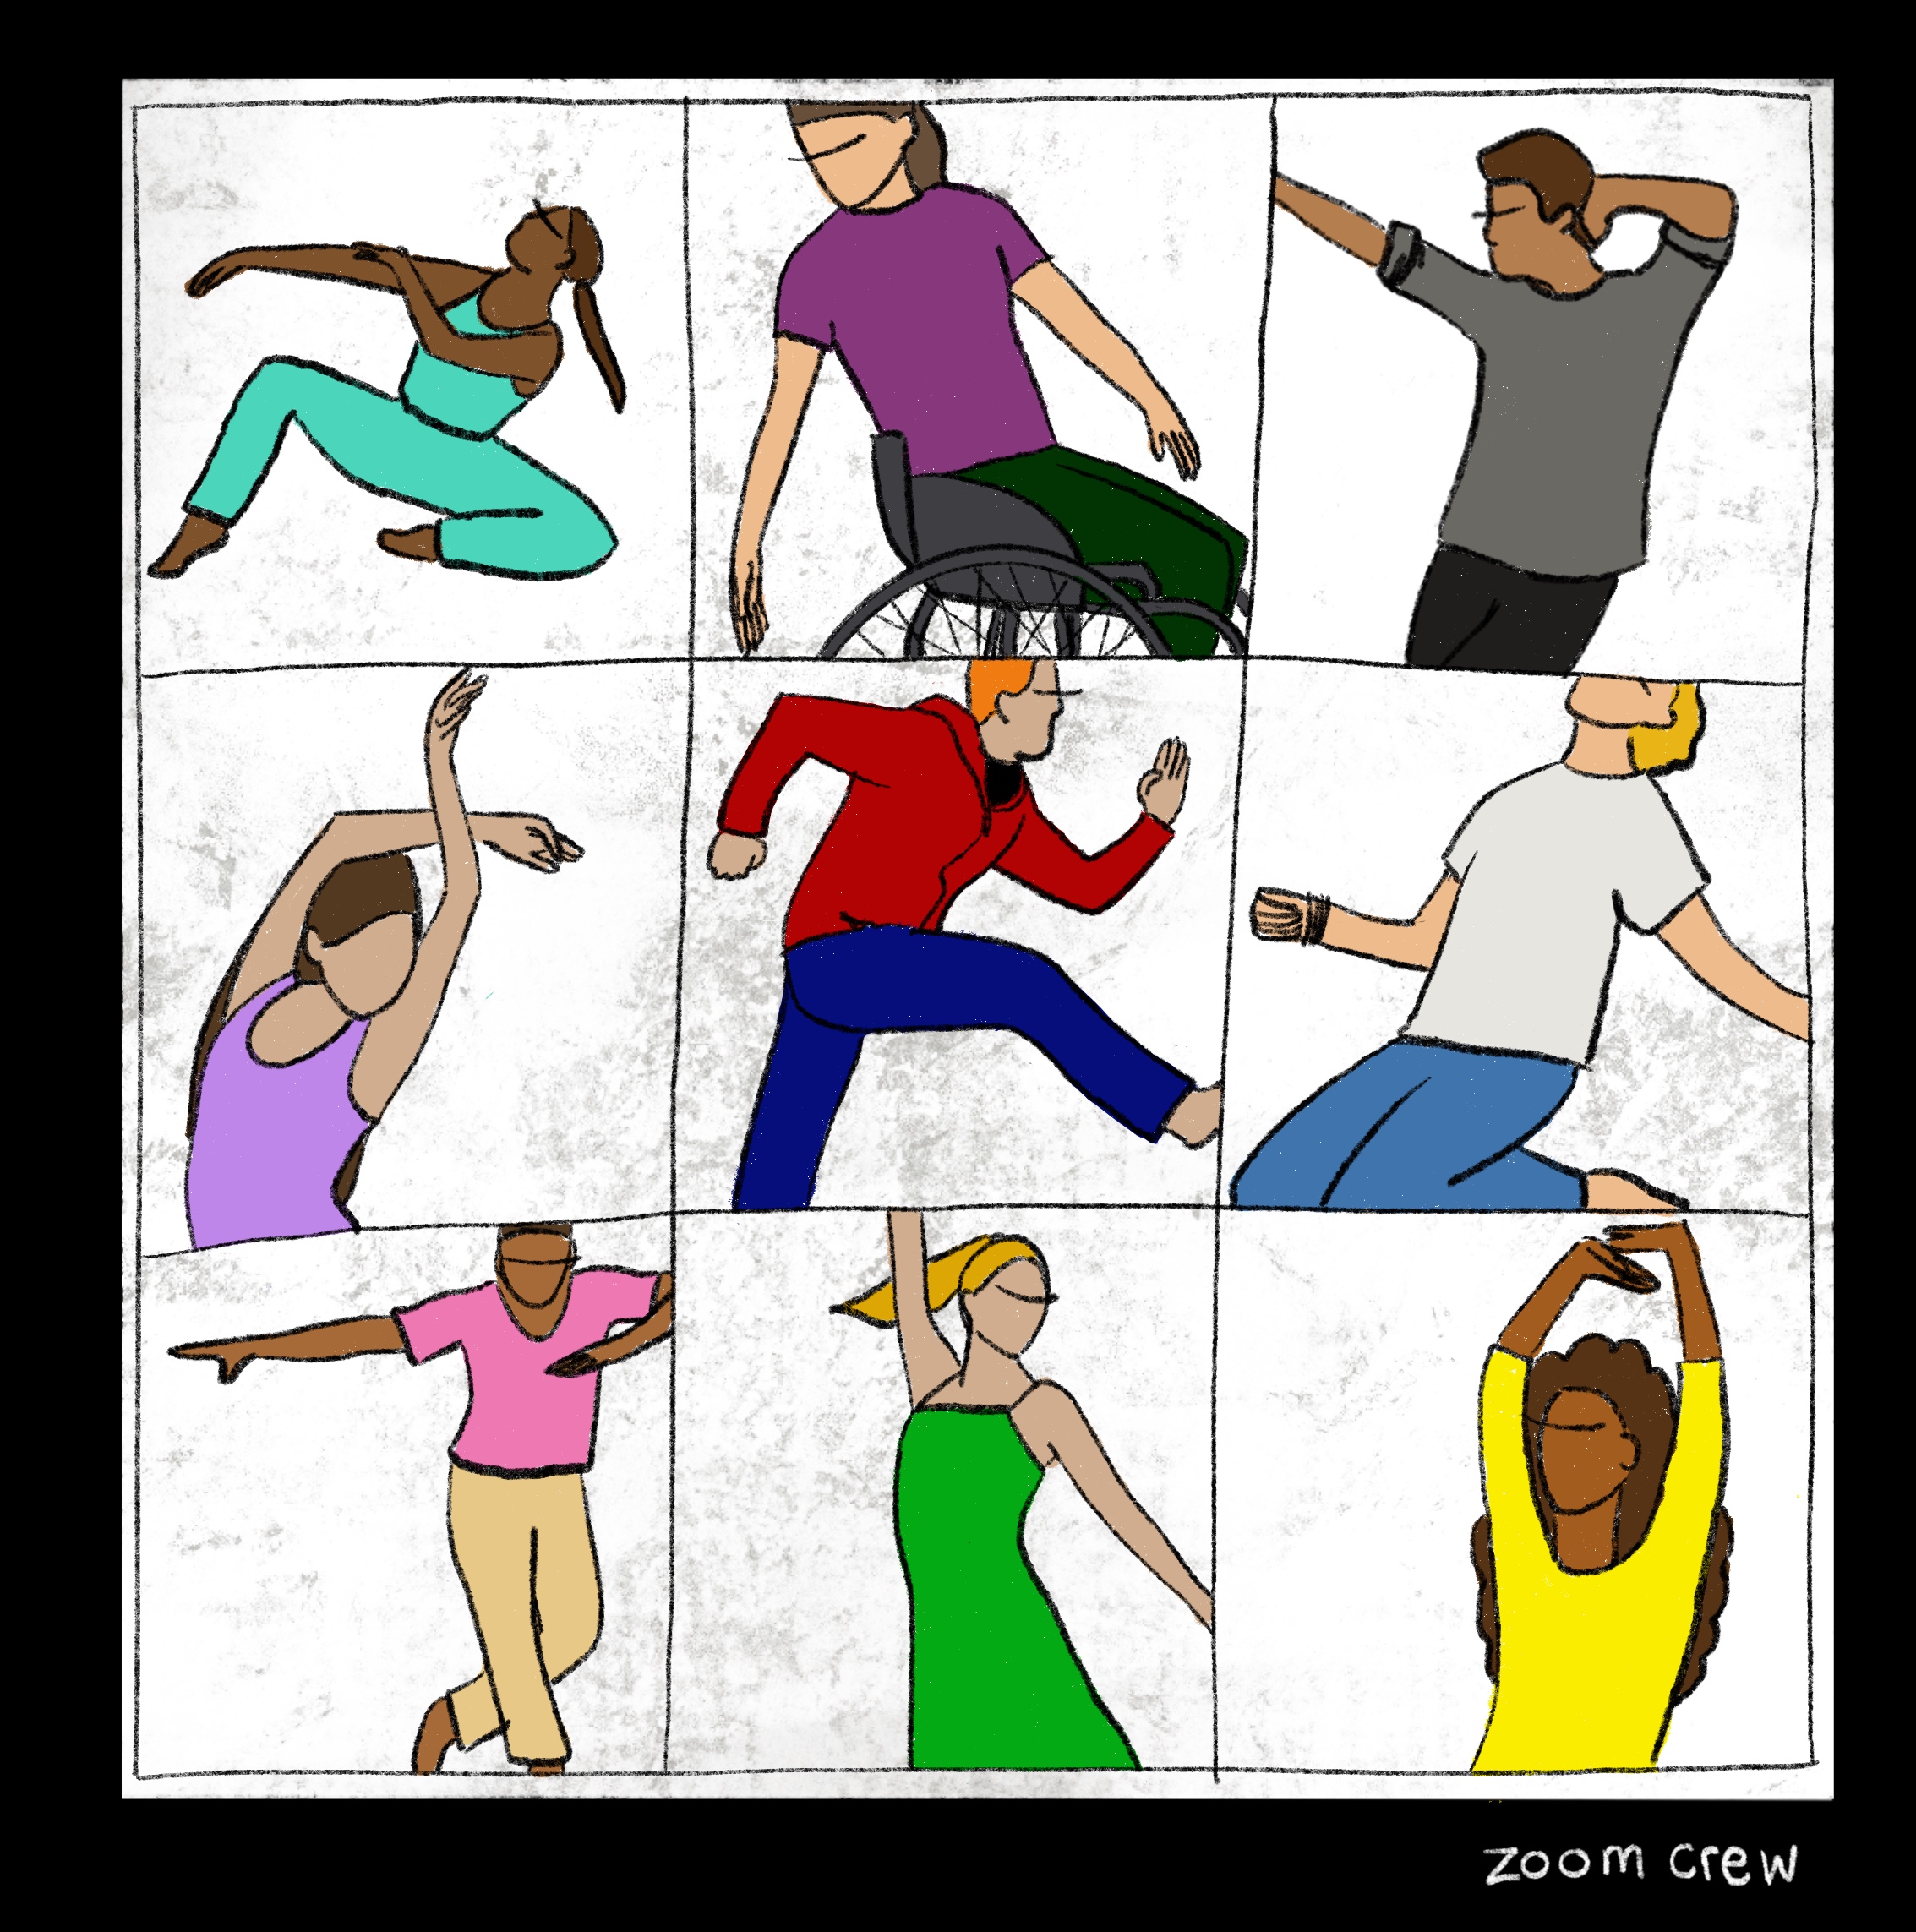 Digital pencil drawing of a dance crew on zoom. The picture is split into nine boxes each with a different dancer in a different pose captured mid dance.